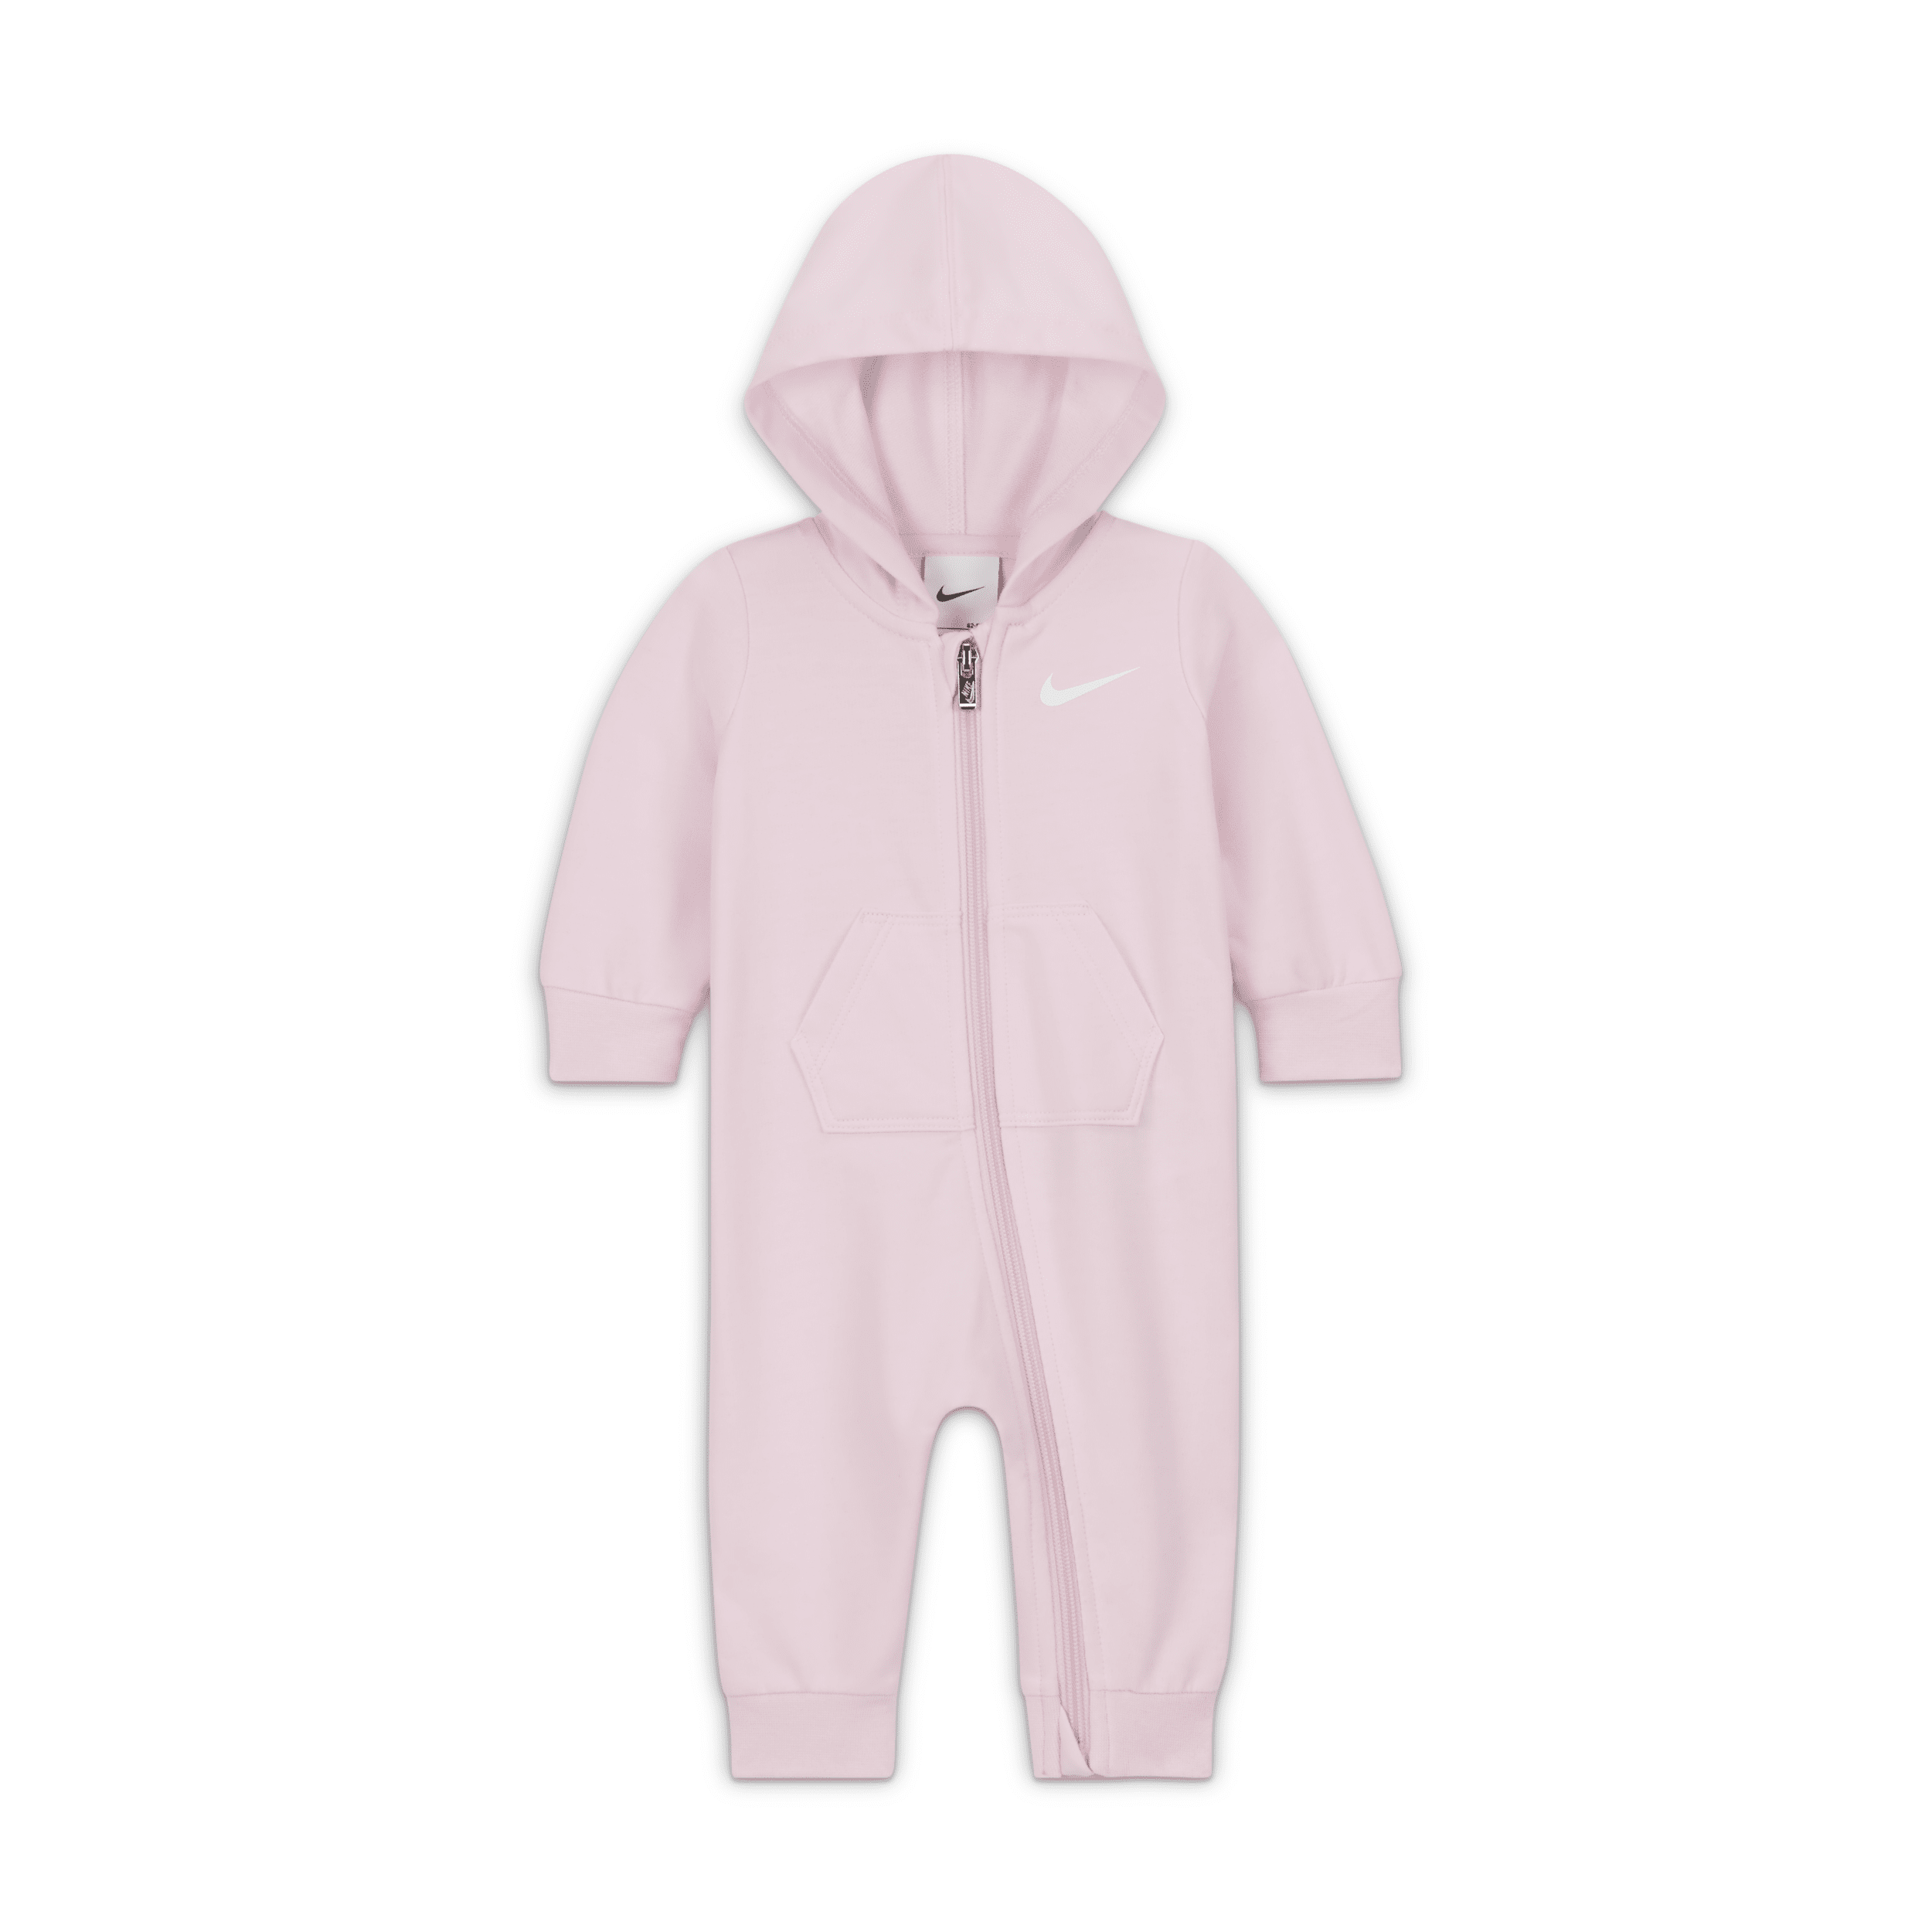 Nike Essentials Hooded Coverall Baby Coverall In Pink